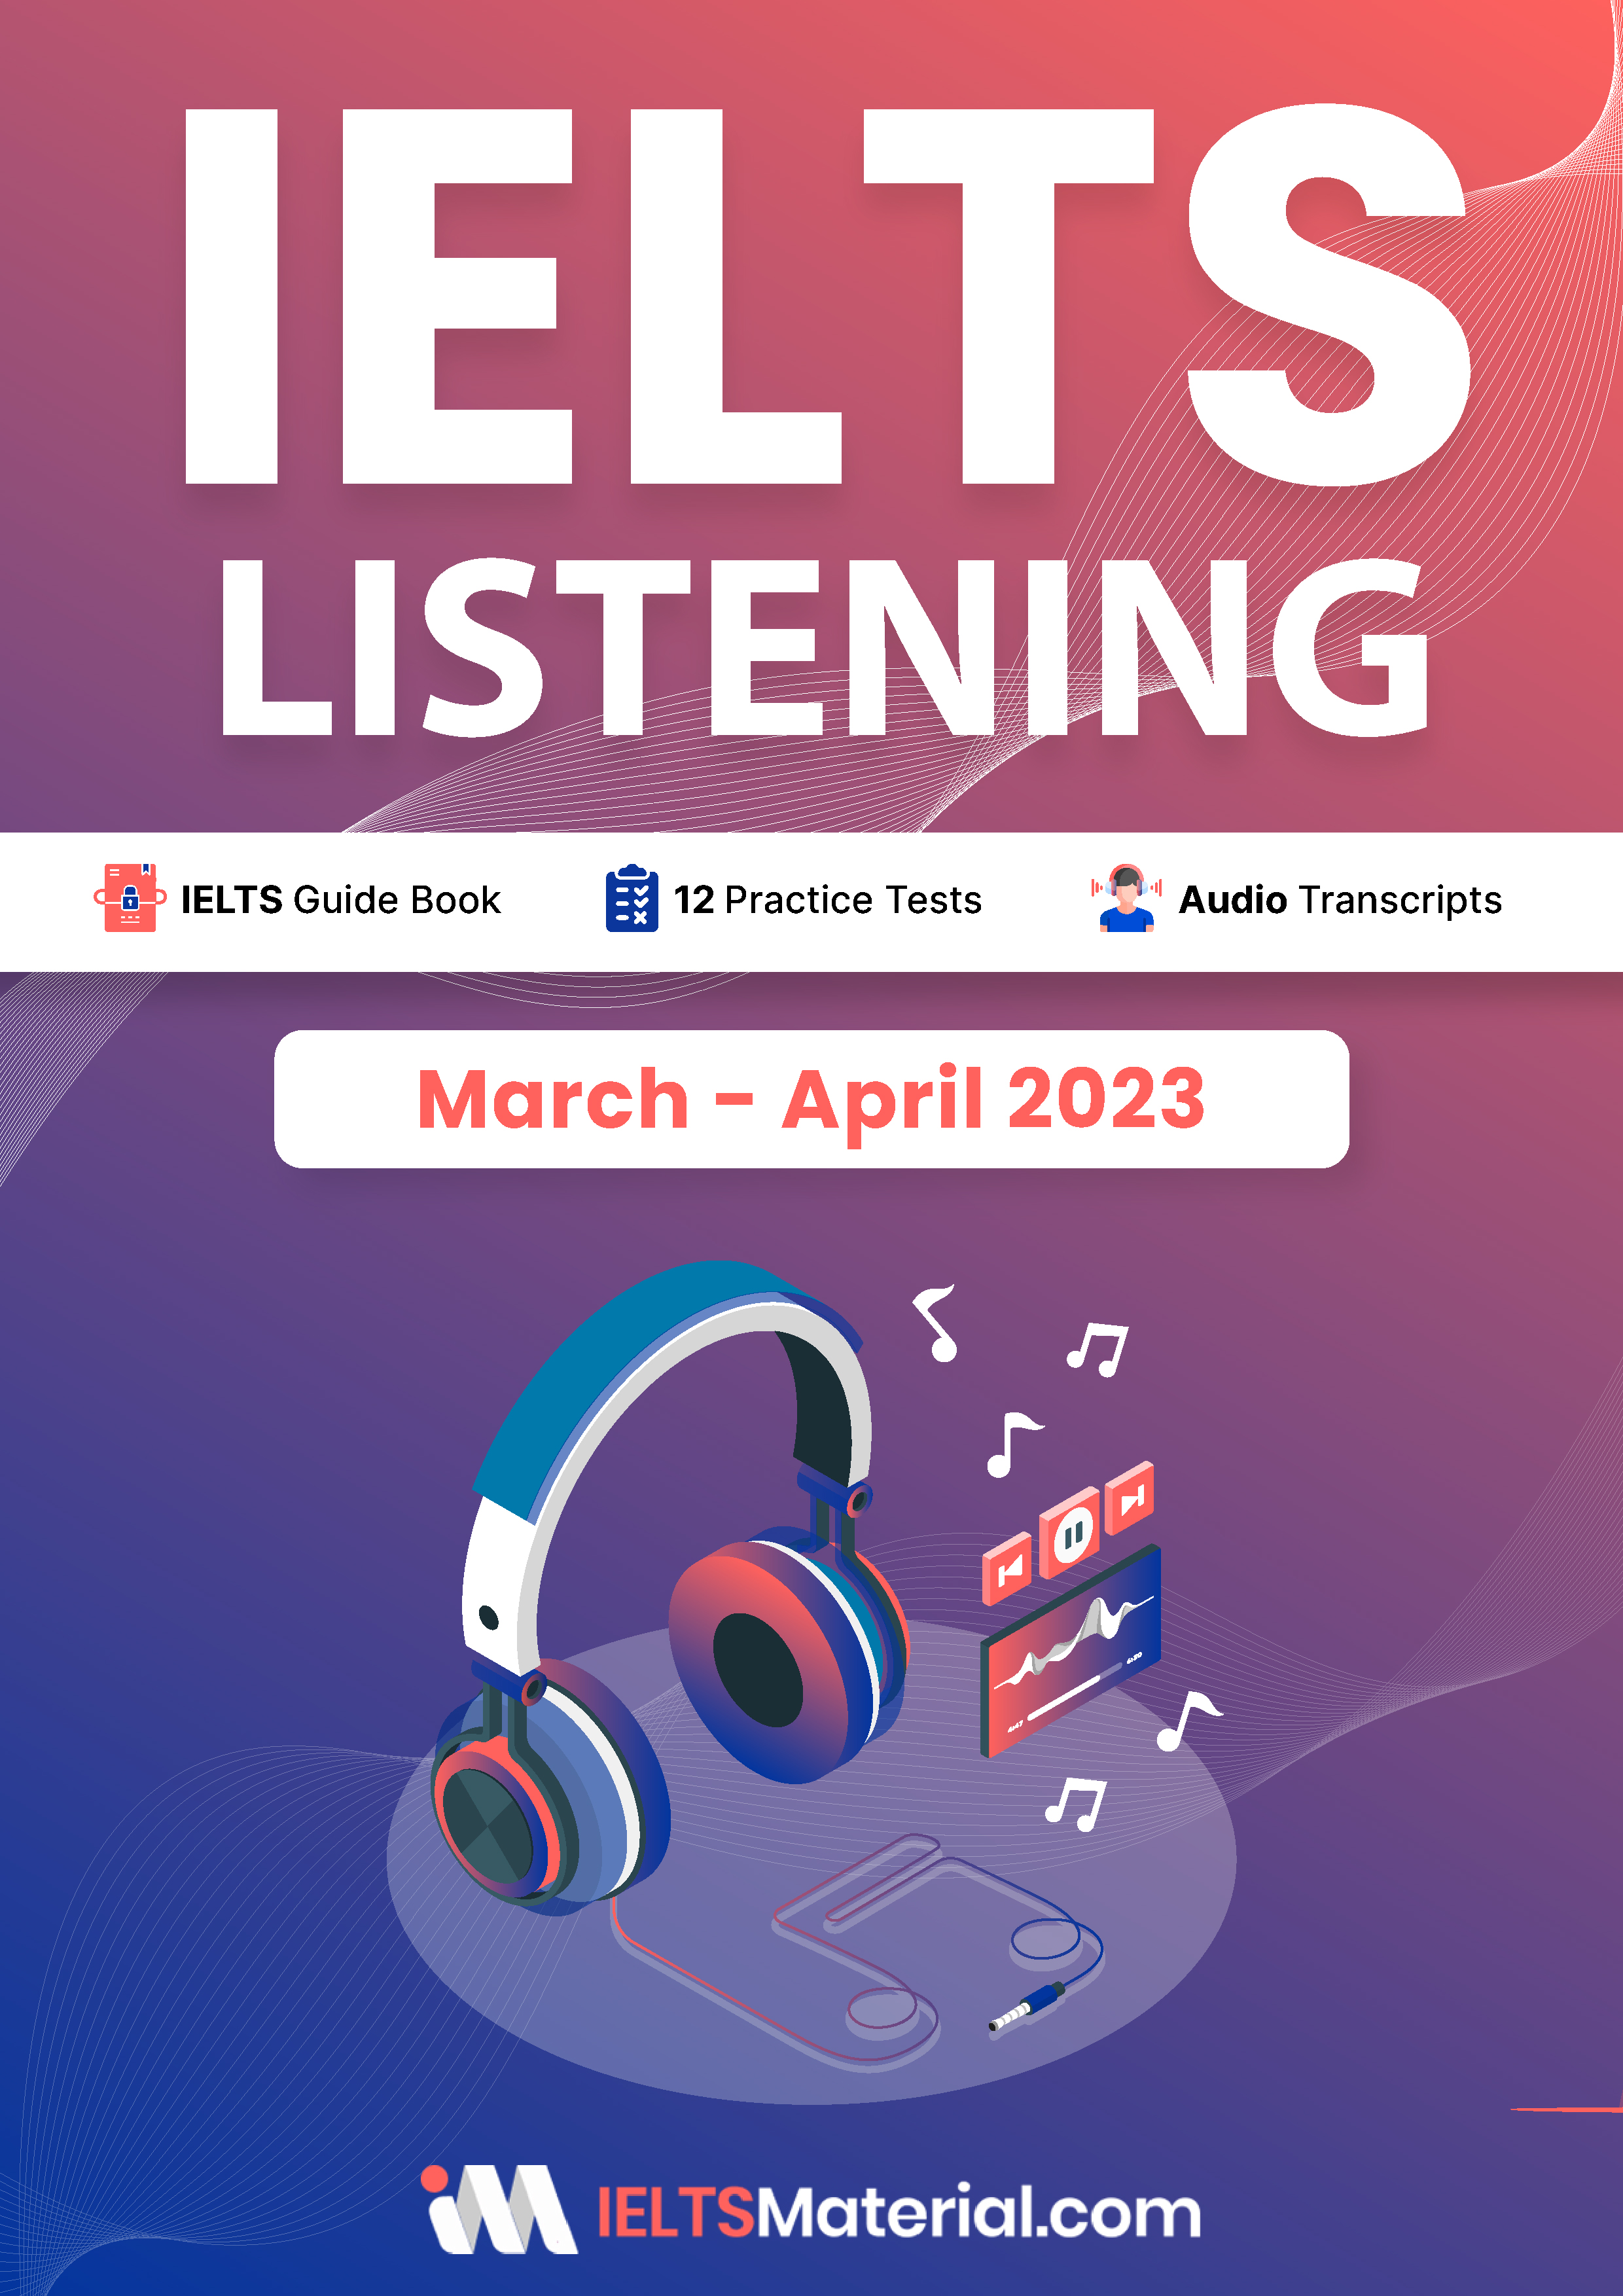 Compilation of Latest Actual Tests for IELTS Listening: Guide to Focus on Listening Skills